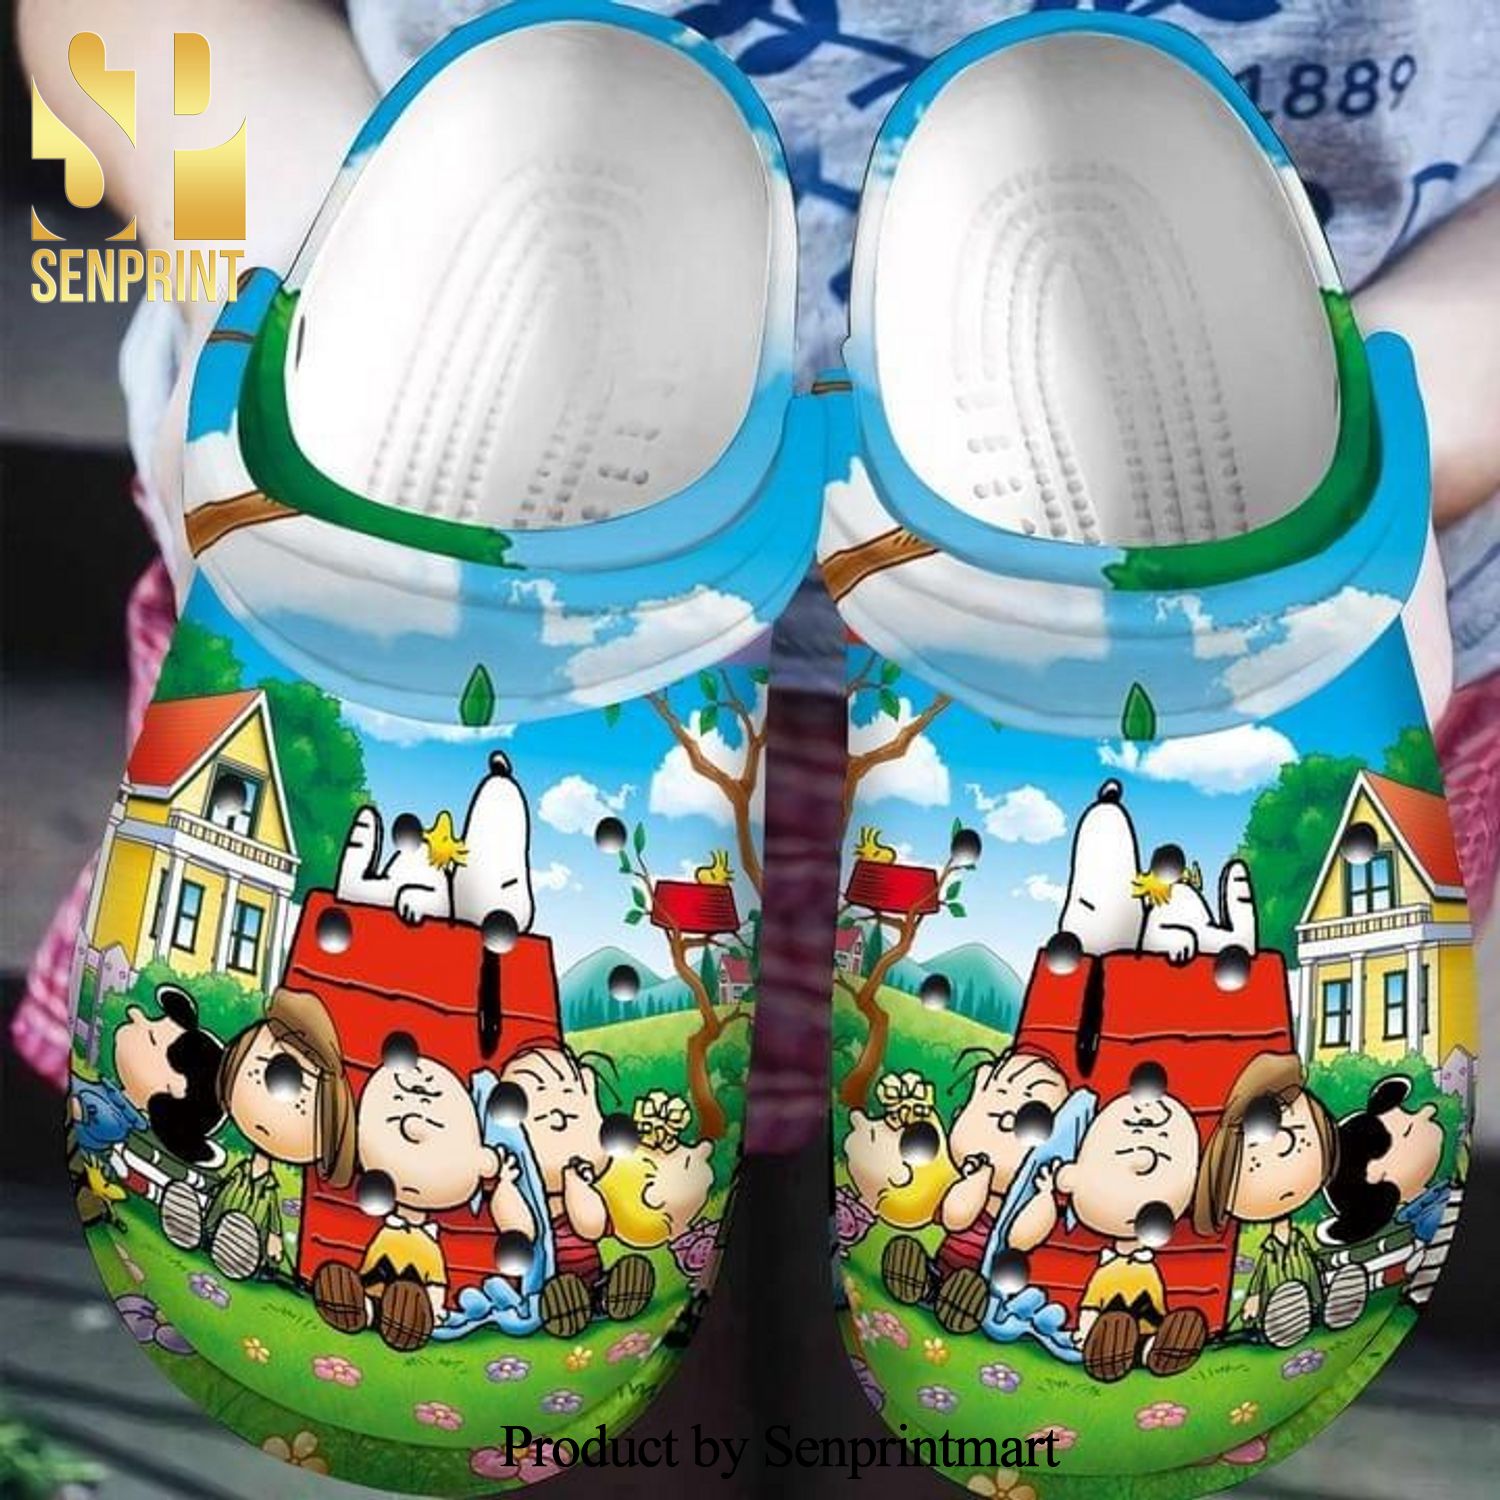 Snoopy Dog And Charlie Brown With Friends Gift For Loverar Street Style Unisex Crocs Crocband Clog